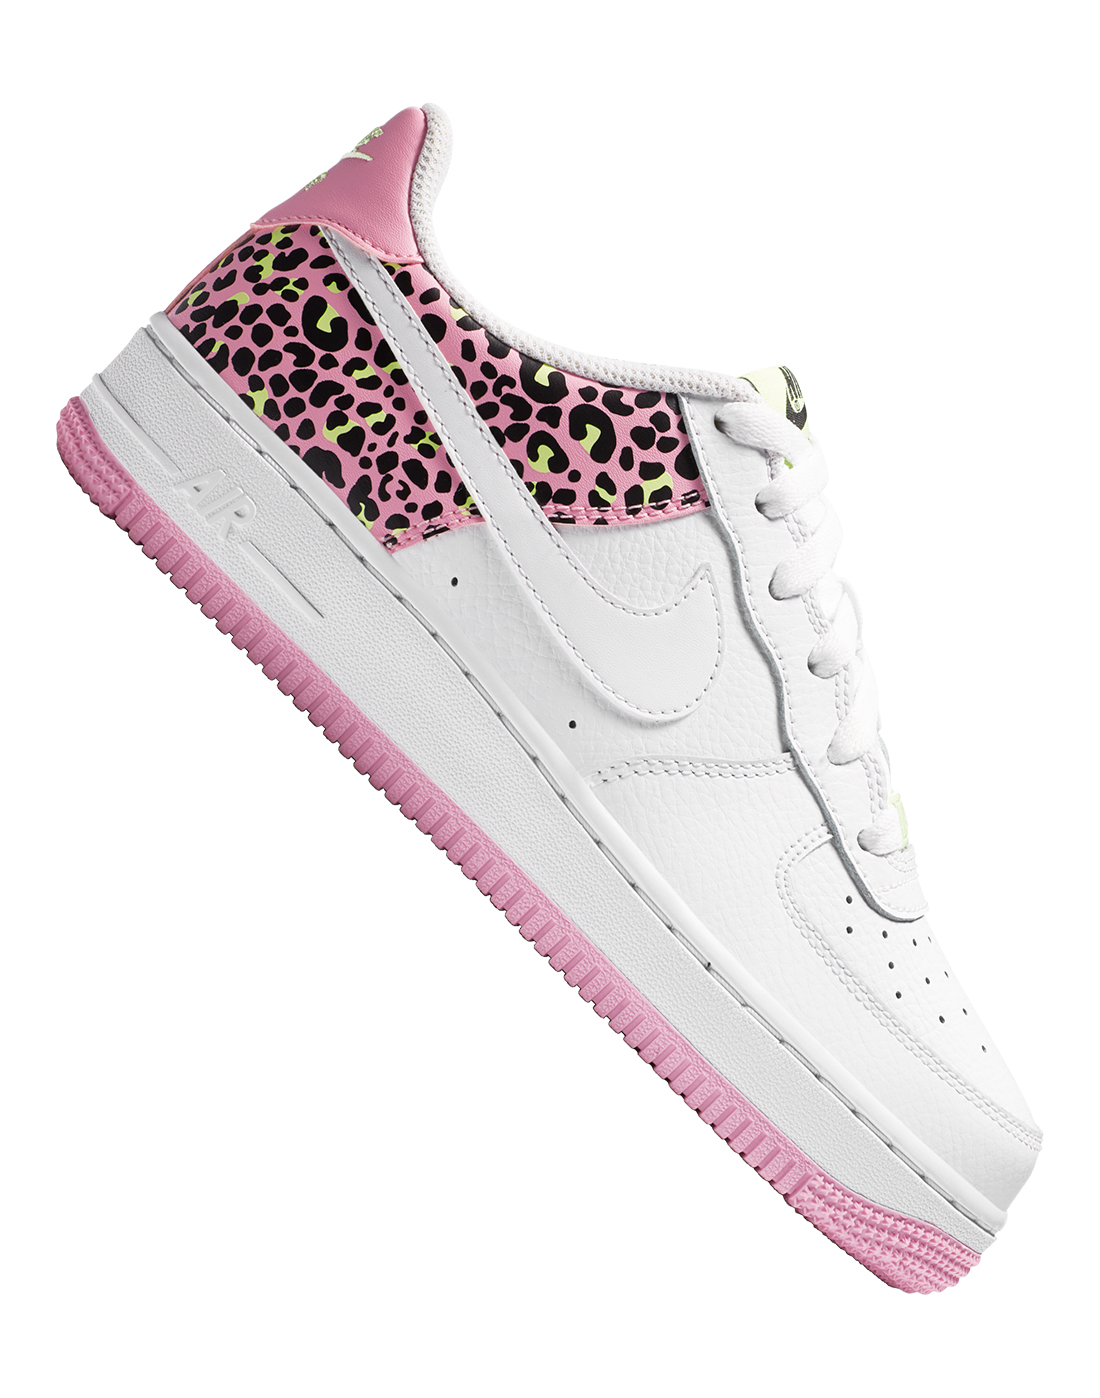 nike air force 1 lifestyle sports